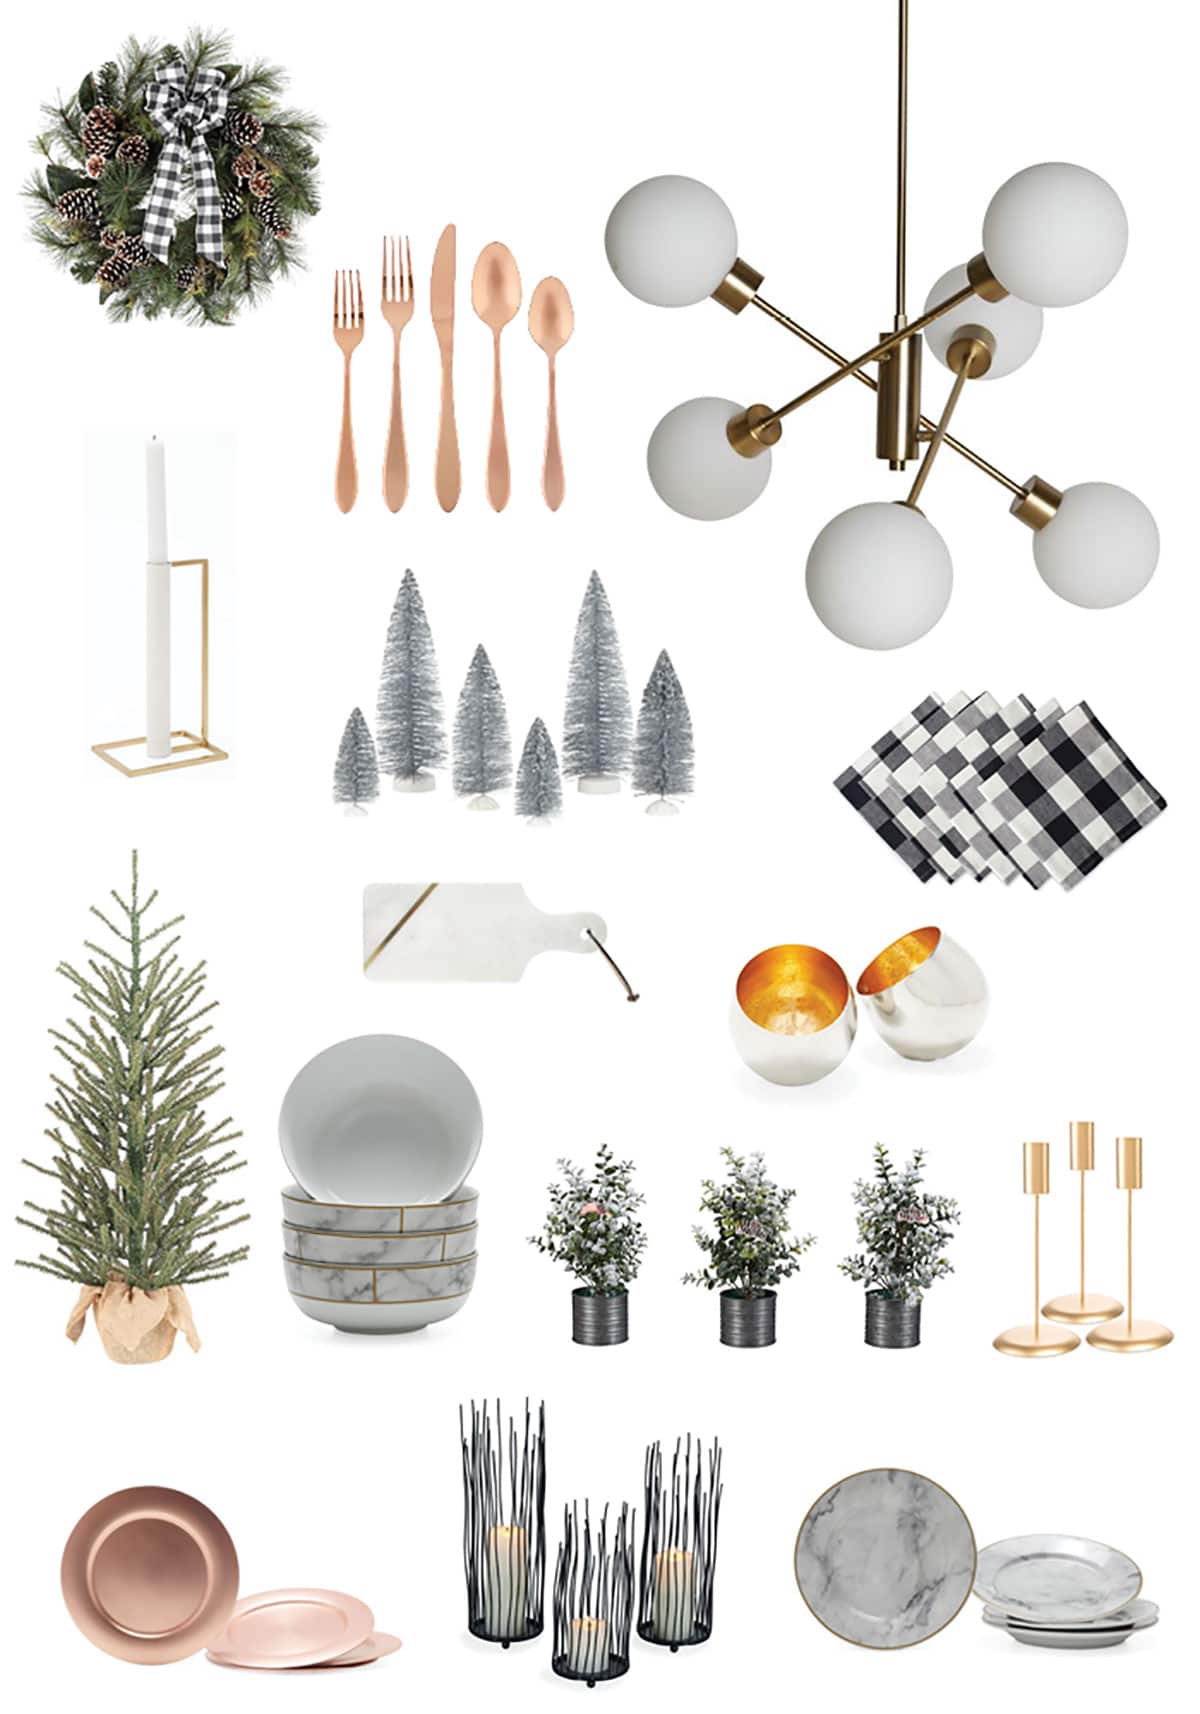 Make Your Dining Room Table Holiday Ready with affordable decor from Walmart